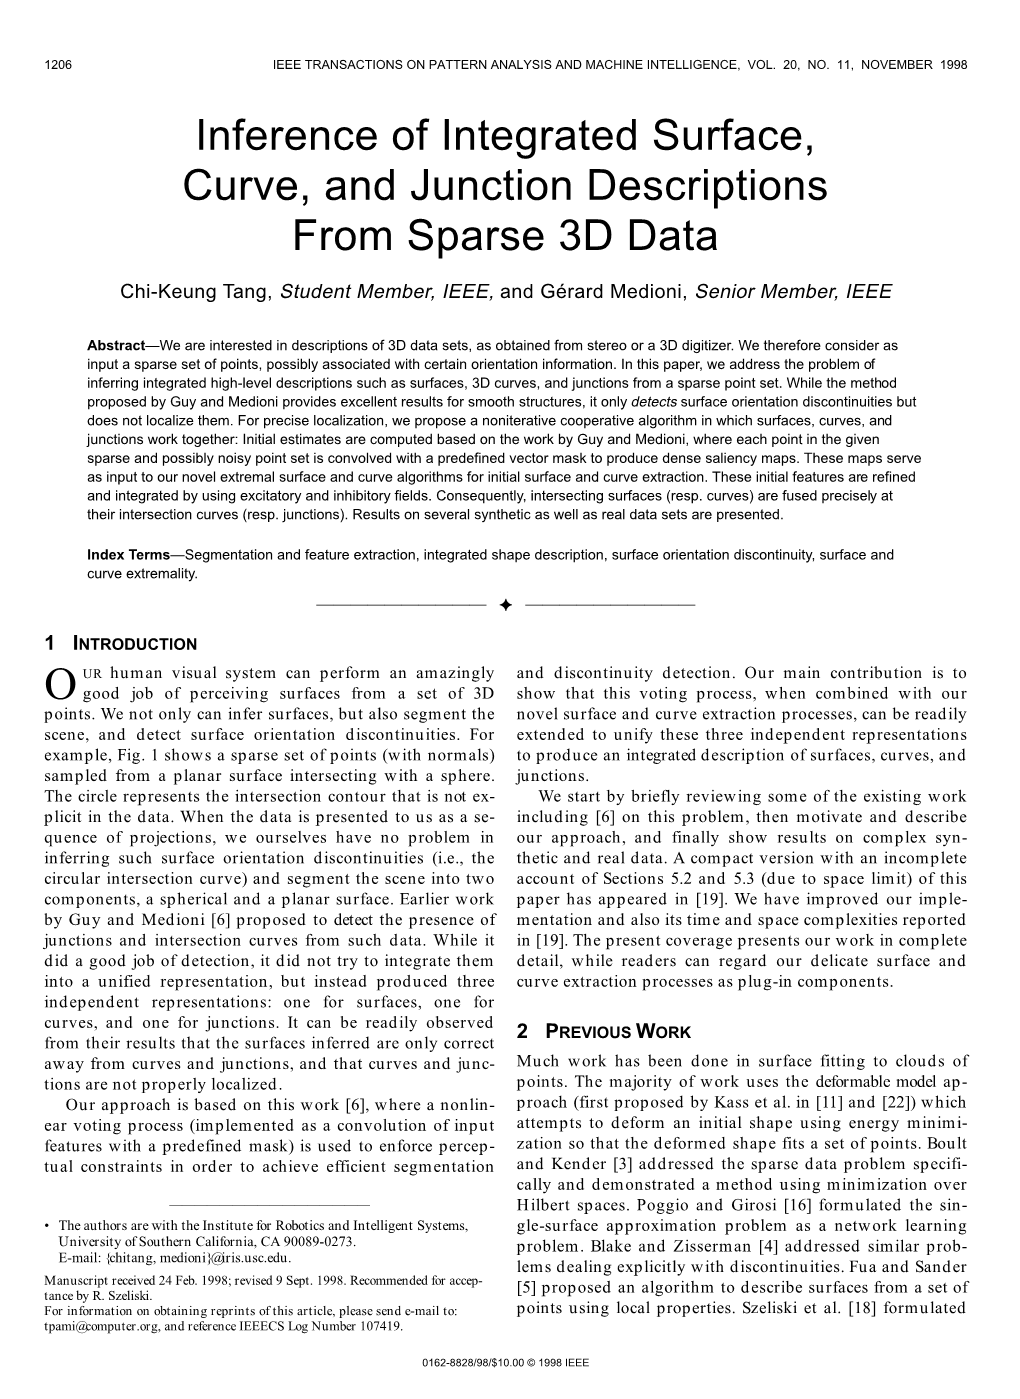 Inference of Integrated Surface, Curve, and Junction Descriptions from Sparse 3D Data